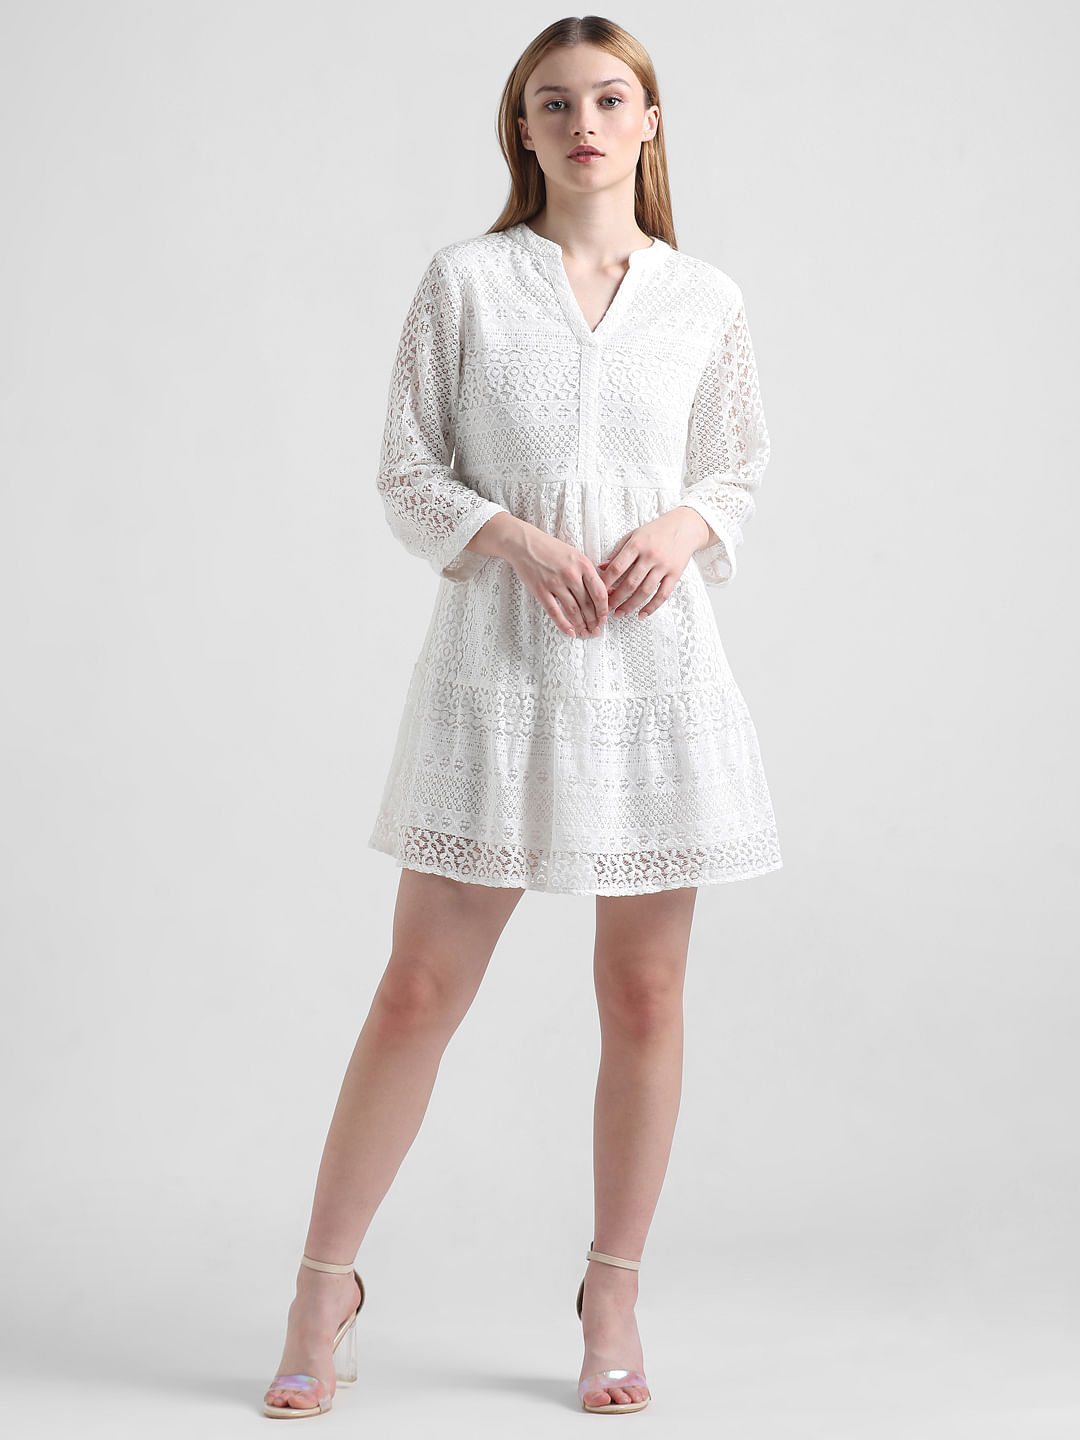 Lace White Dresses | Nordstrom